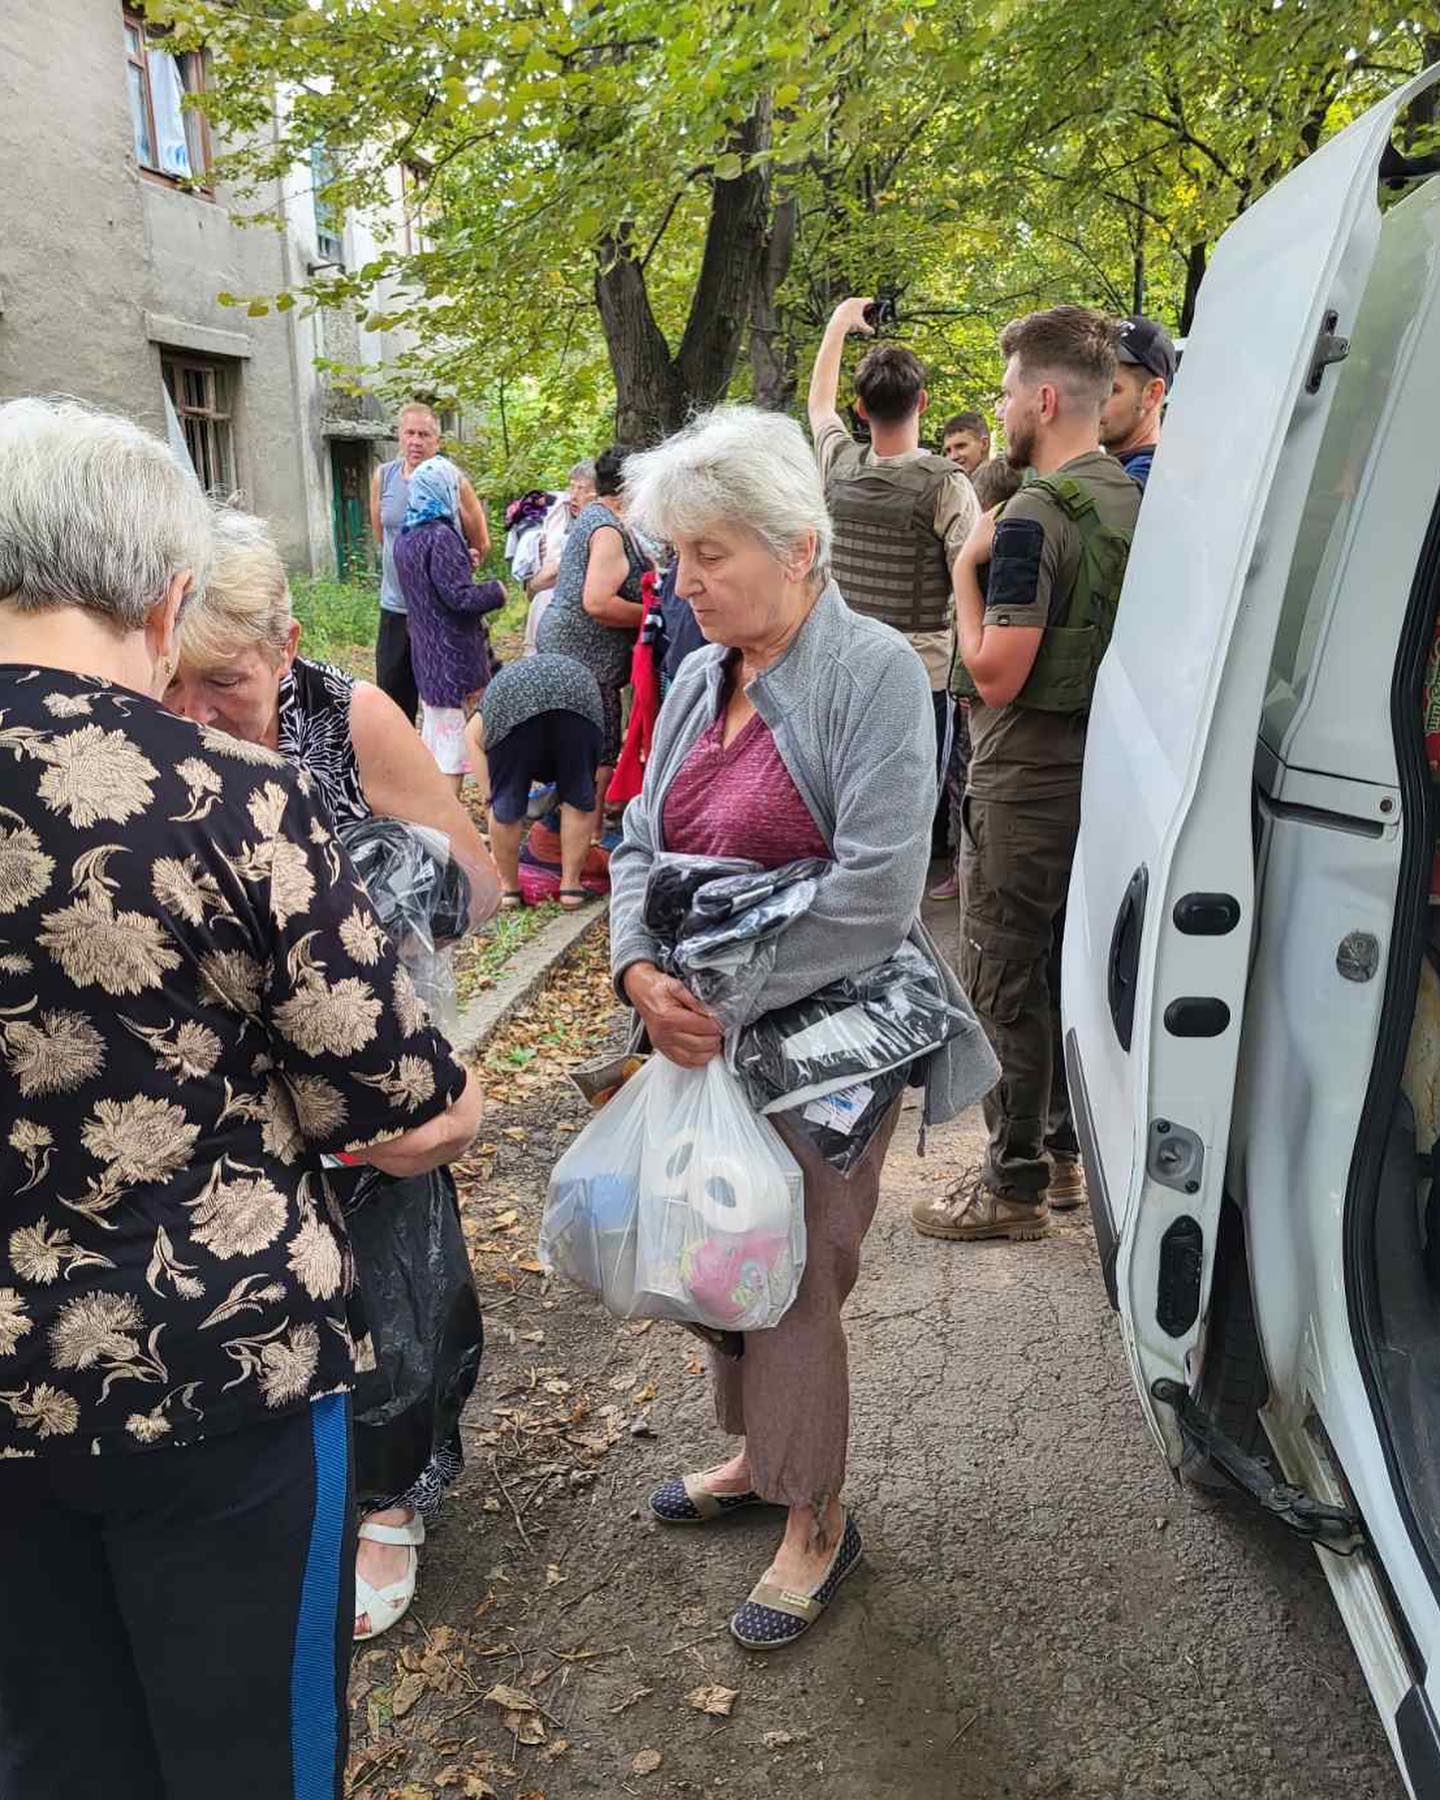 A group of elderly people standing next to a van.